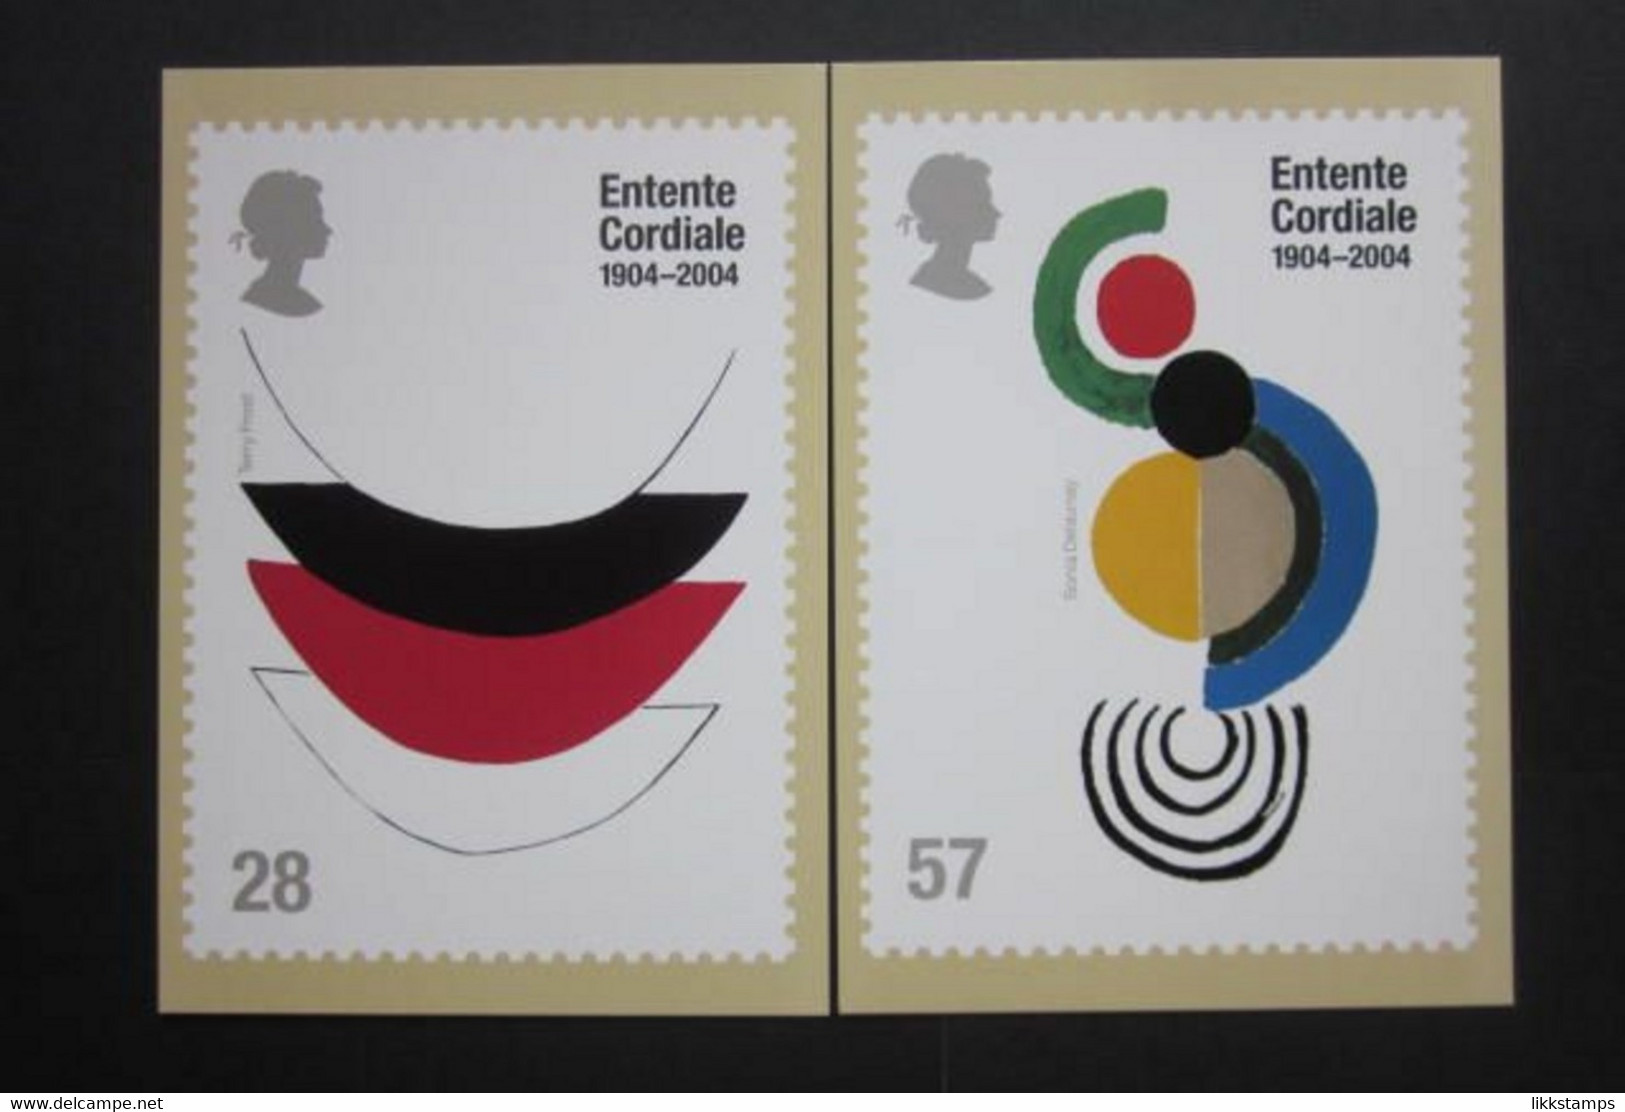 2004 THE CENTENARY OF THE ENTENTE CORDIALE P.H.Q. CARDS UNUSED, ISSUE No. 263 (B) #01519 - PHQ Karten